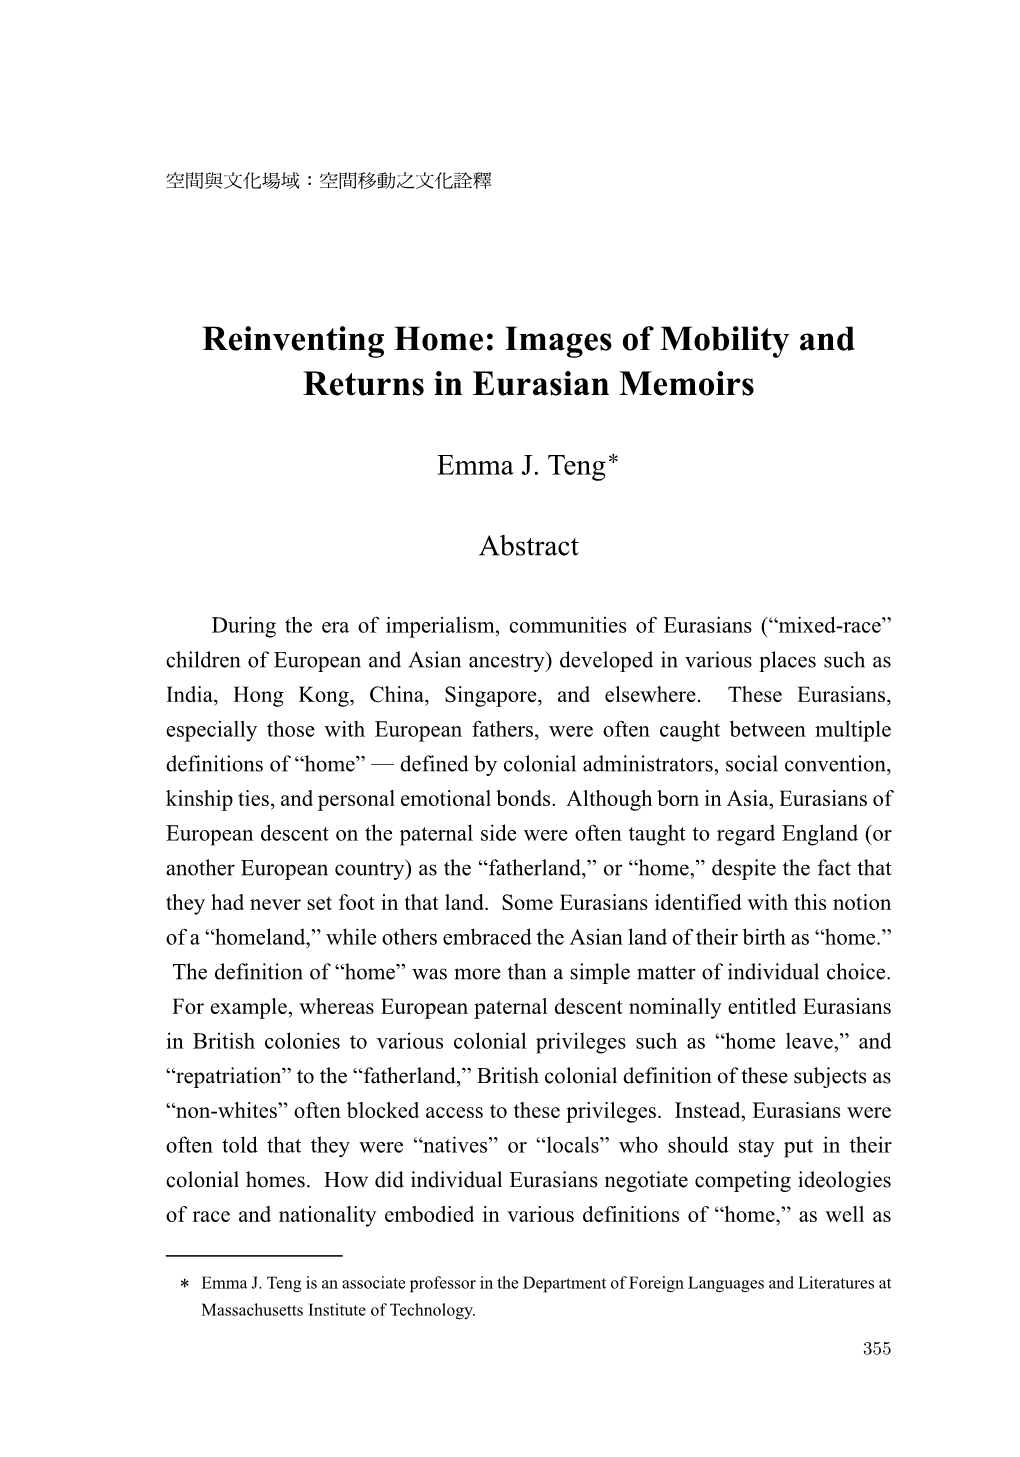 Reinventing Home: Images of Mobility and Returns in Eurasian Memoirs